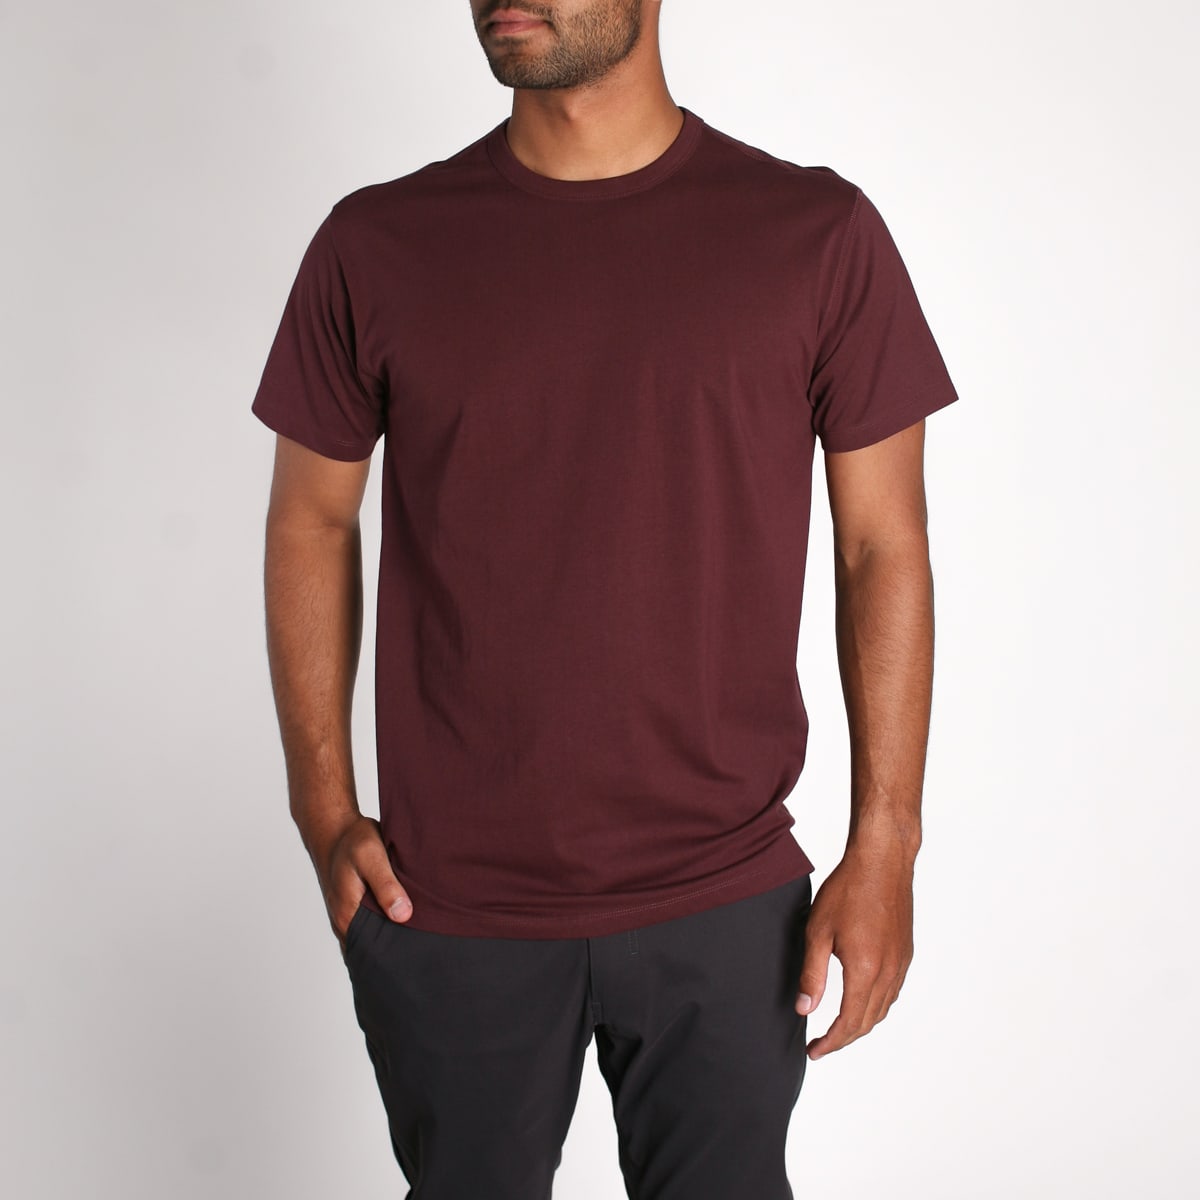 Men's T-Shirts - Browse Products - The Factory Outlet